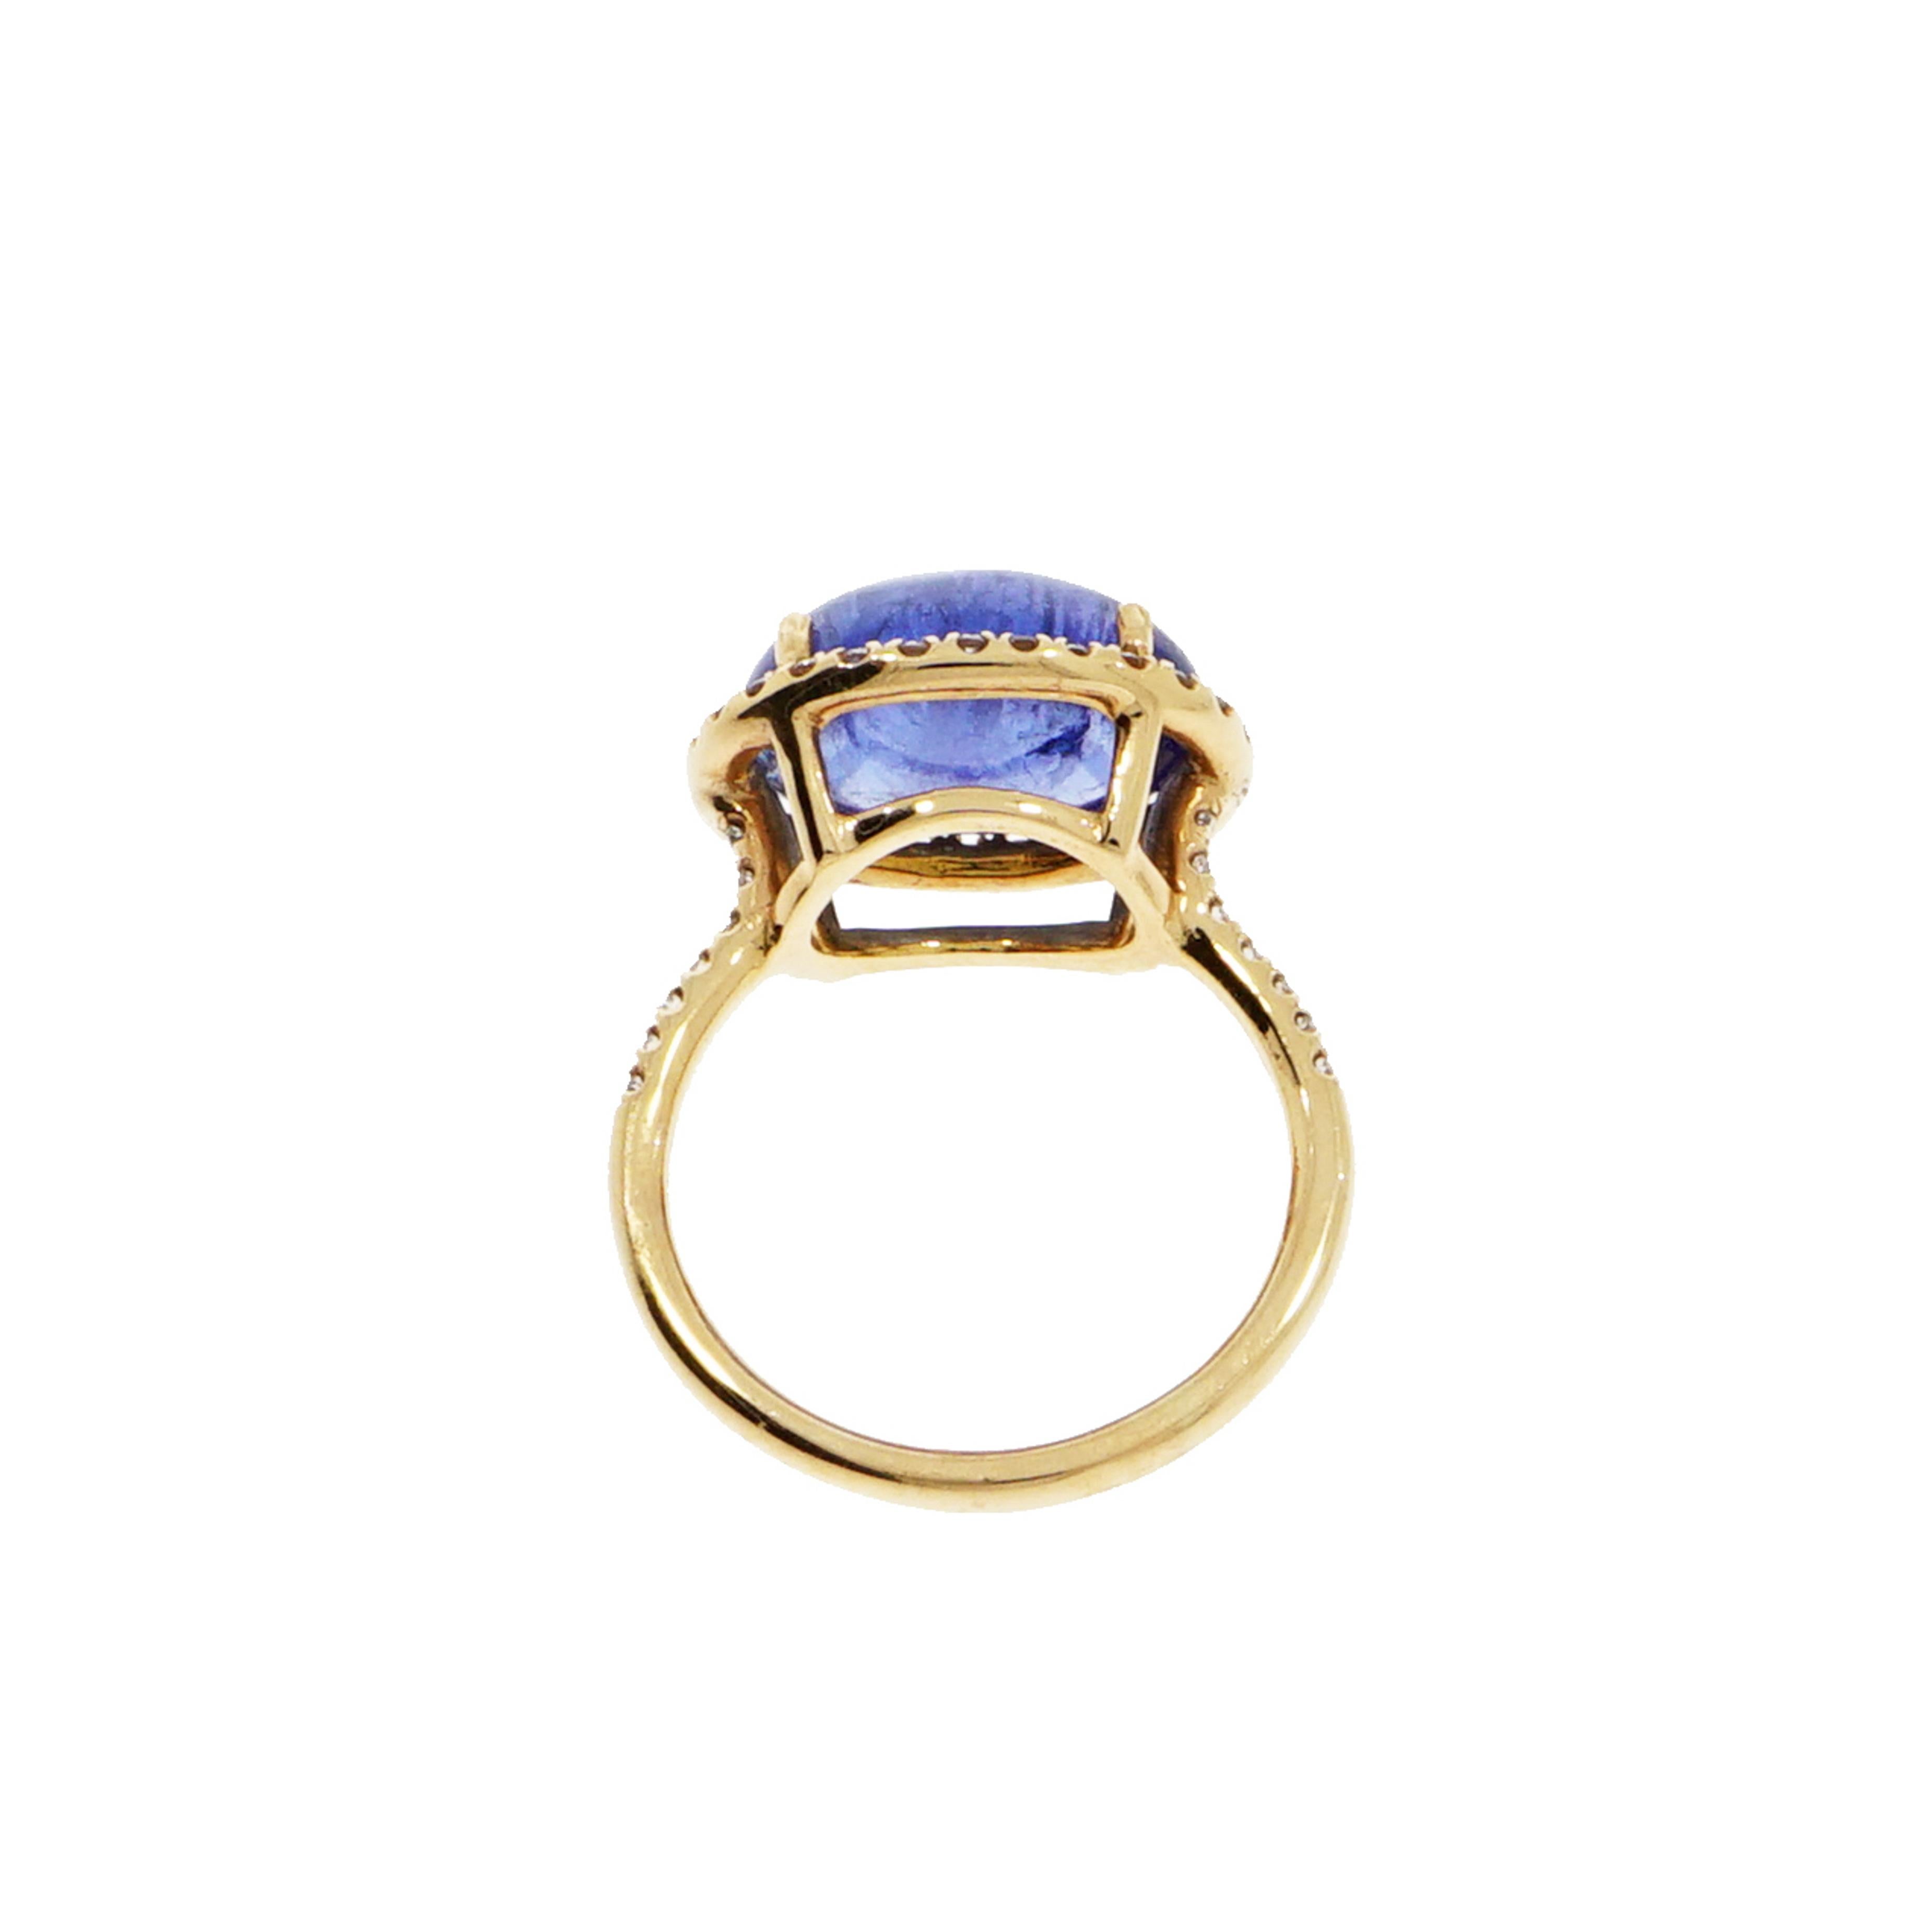 A precious gift from Nature... Oval shaped Tanzanite Cabochon cut, meticulously crafted and designed in NYC, using 18k rose gold to create this beautiful Tanzanite Ring with a halo of white diamonds.
The Tanzanite weighs approximately 6.94 carat and